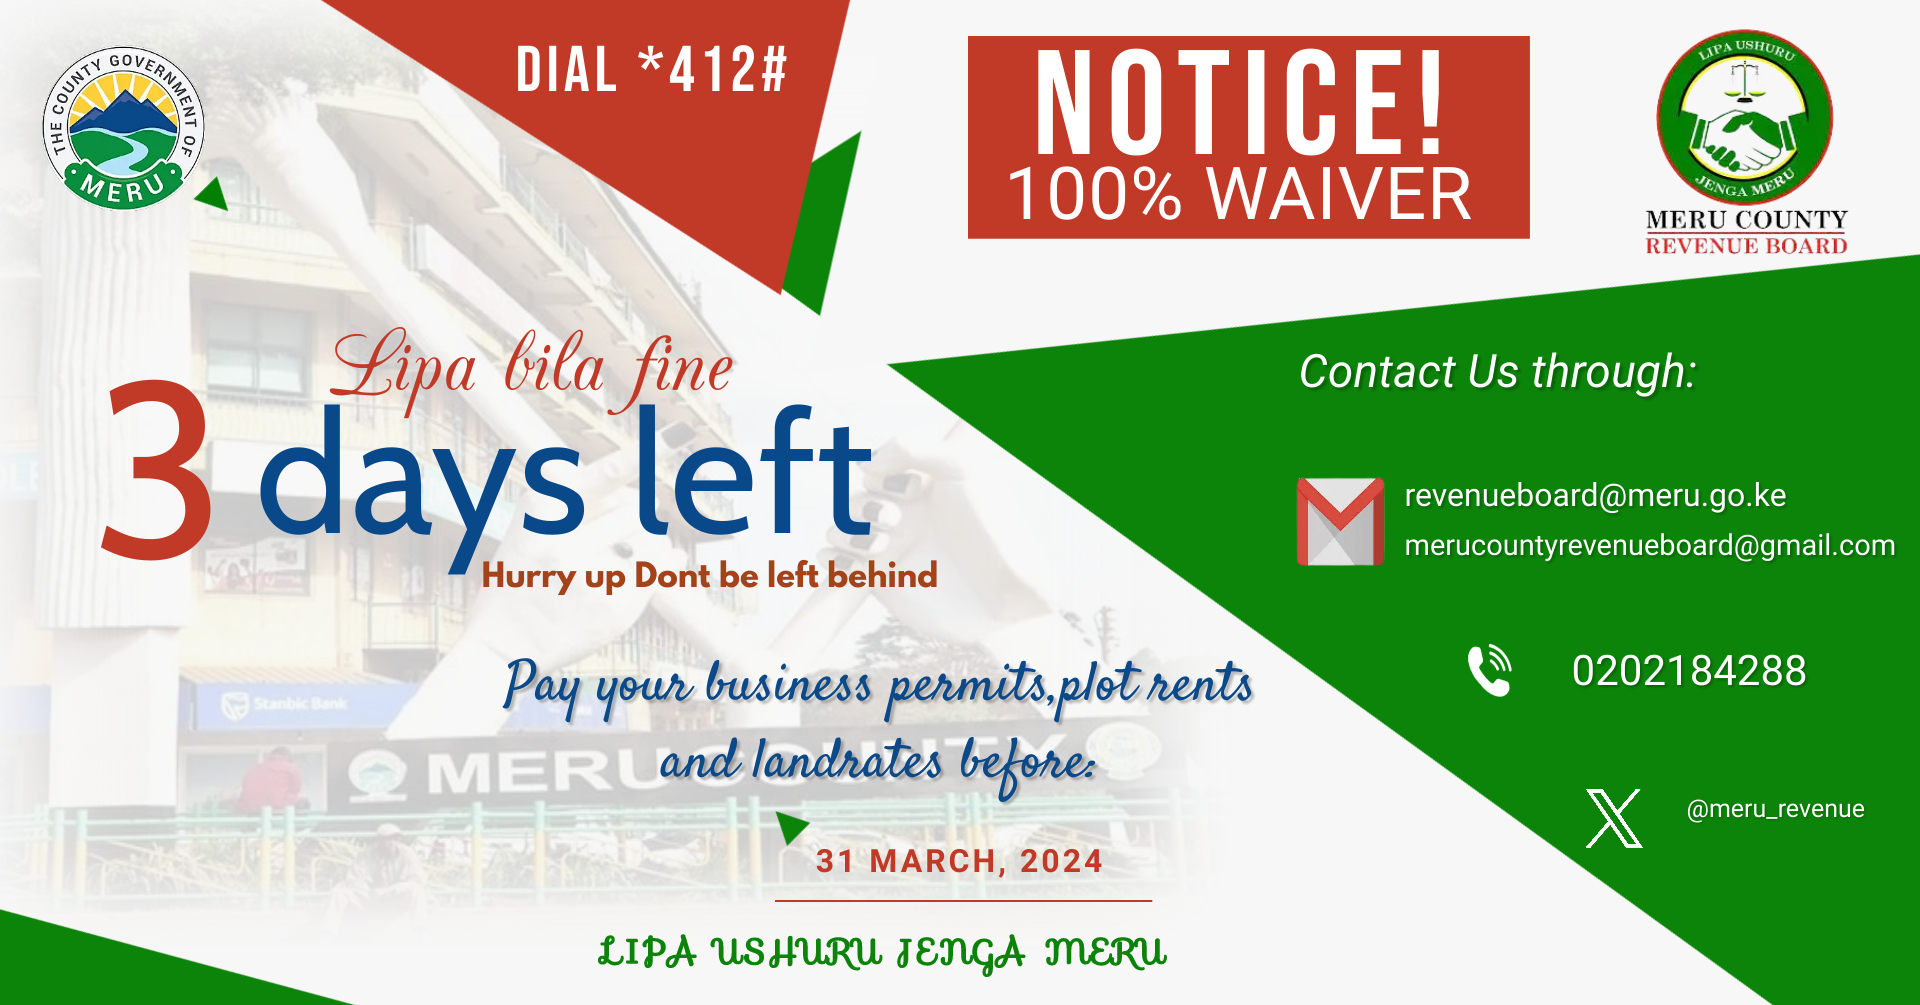 3 days left .Hurry up! Don't be left behind.